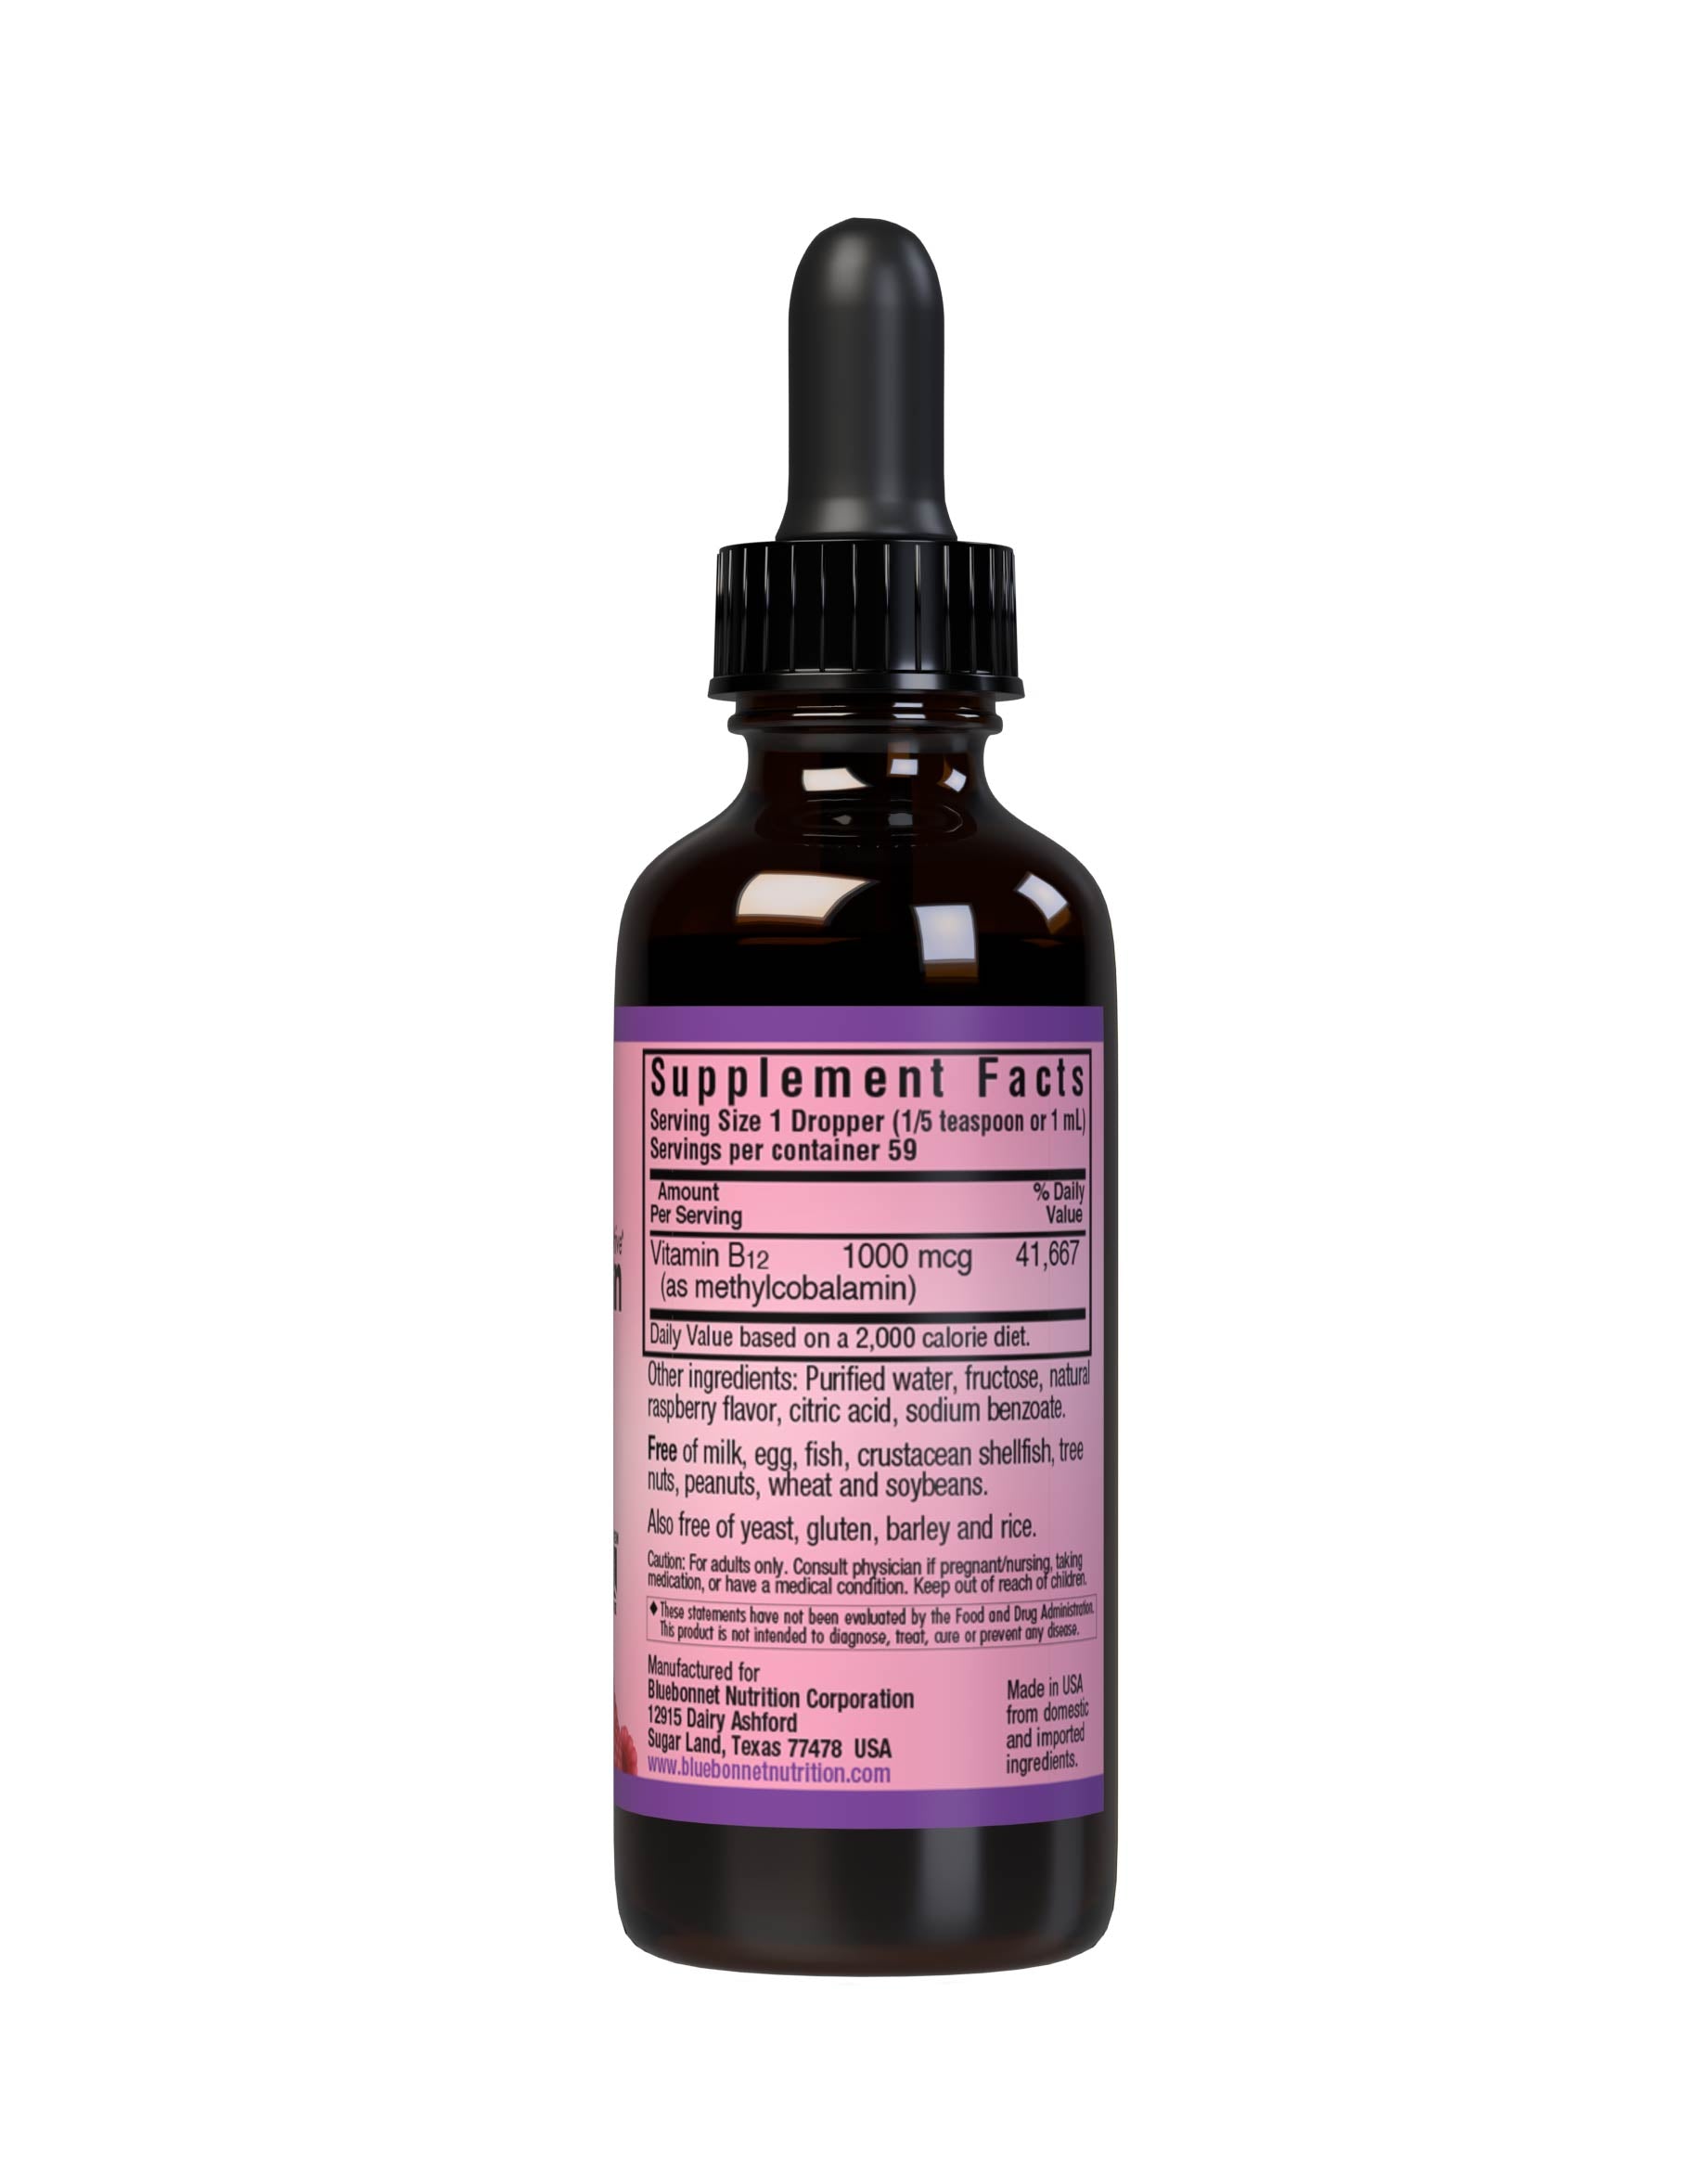 Bluebonnet’s Liquid CellularActive Methylcobalamin Vitamin B12 1000 mcg is formulated with fast-acting vitamin B12 as methylcobalamin, a coenzyme form of B12, which may be better utilized and better retained in the body. Vitamin B12 helps support cellular energy production and nervous system health. Supplement facts panel. #size_2 fl oz